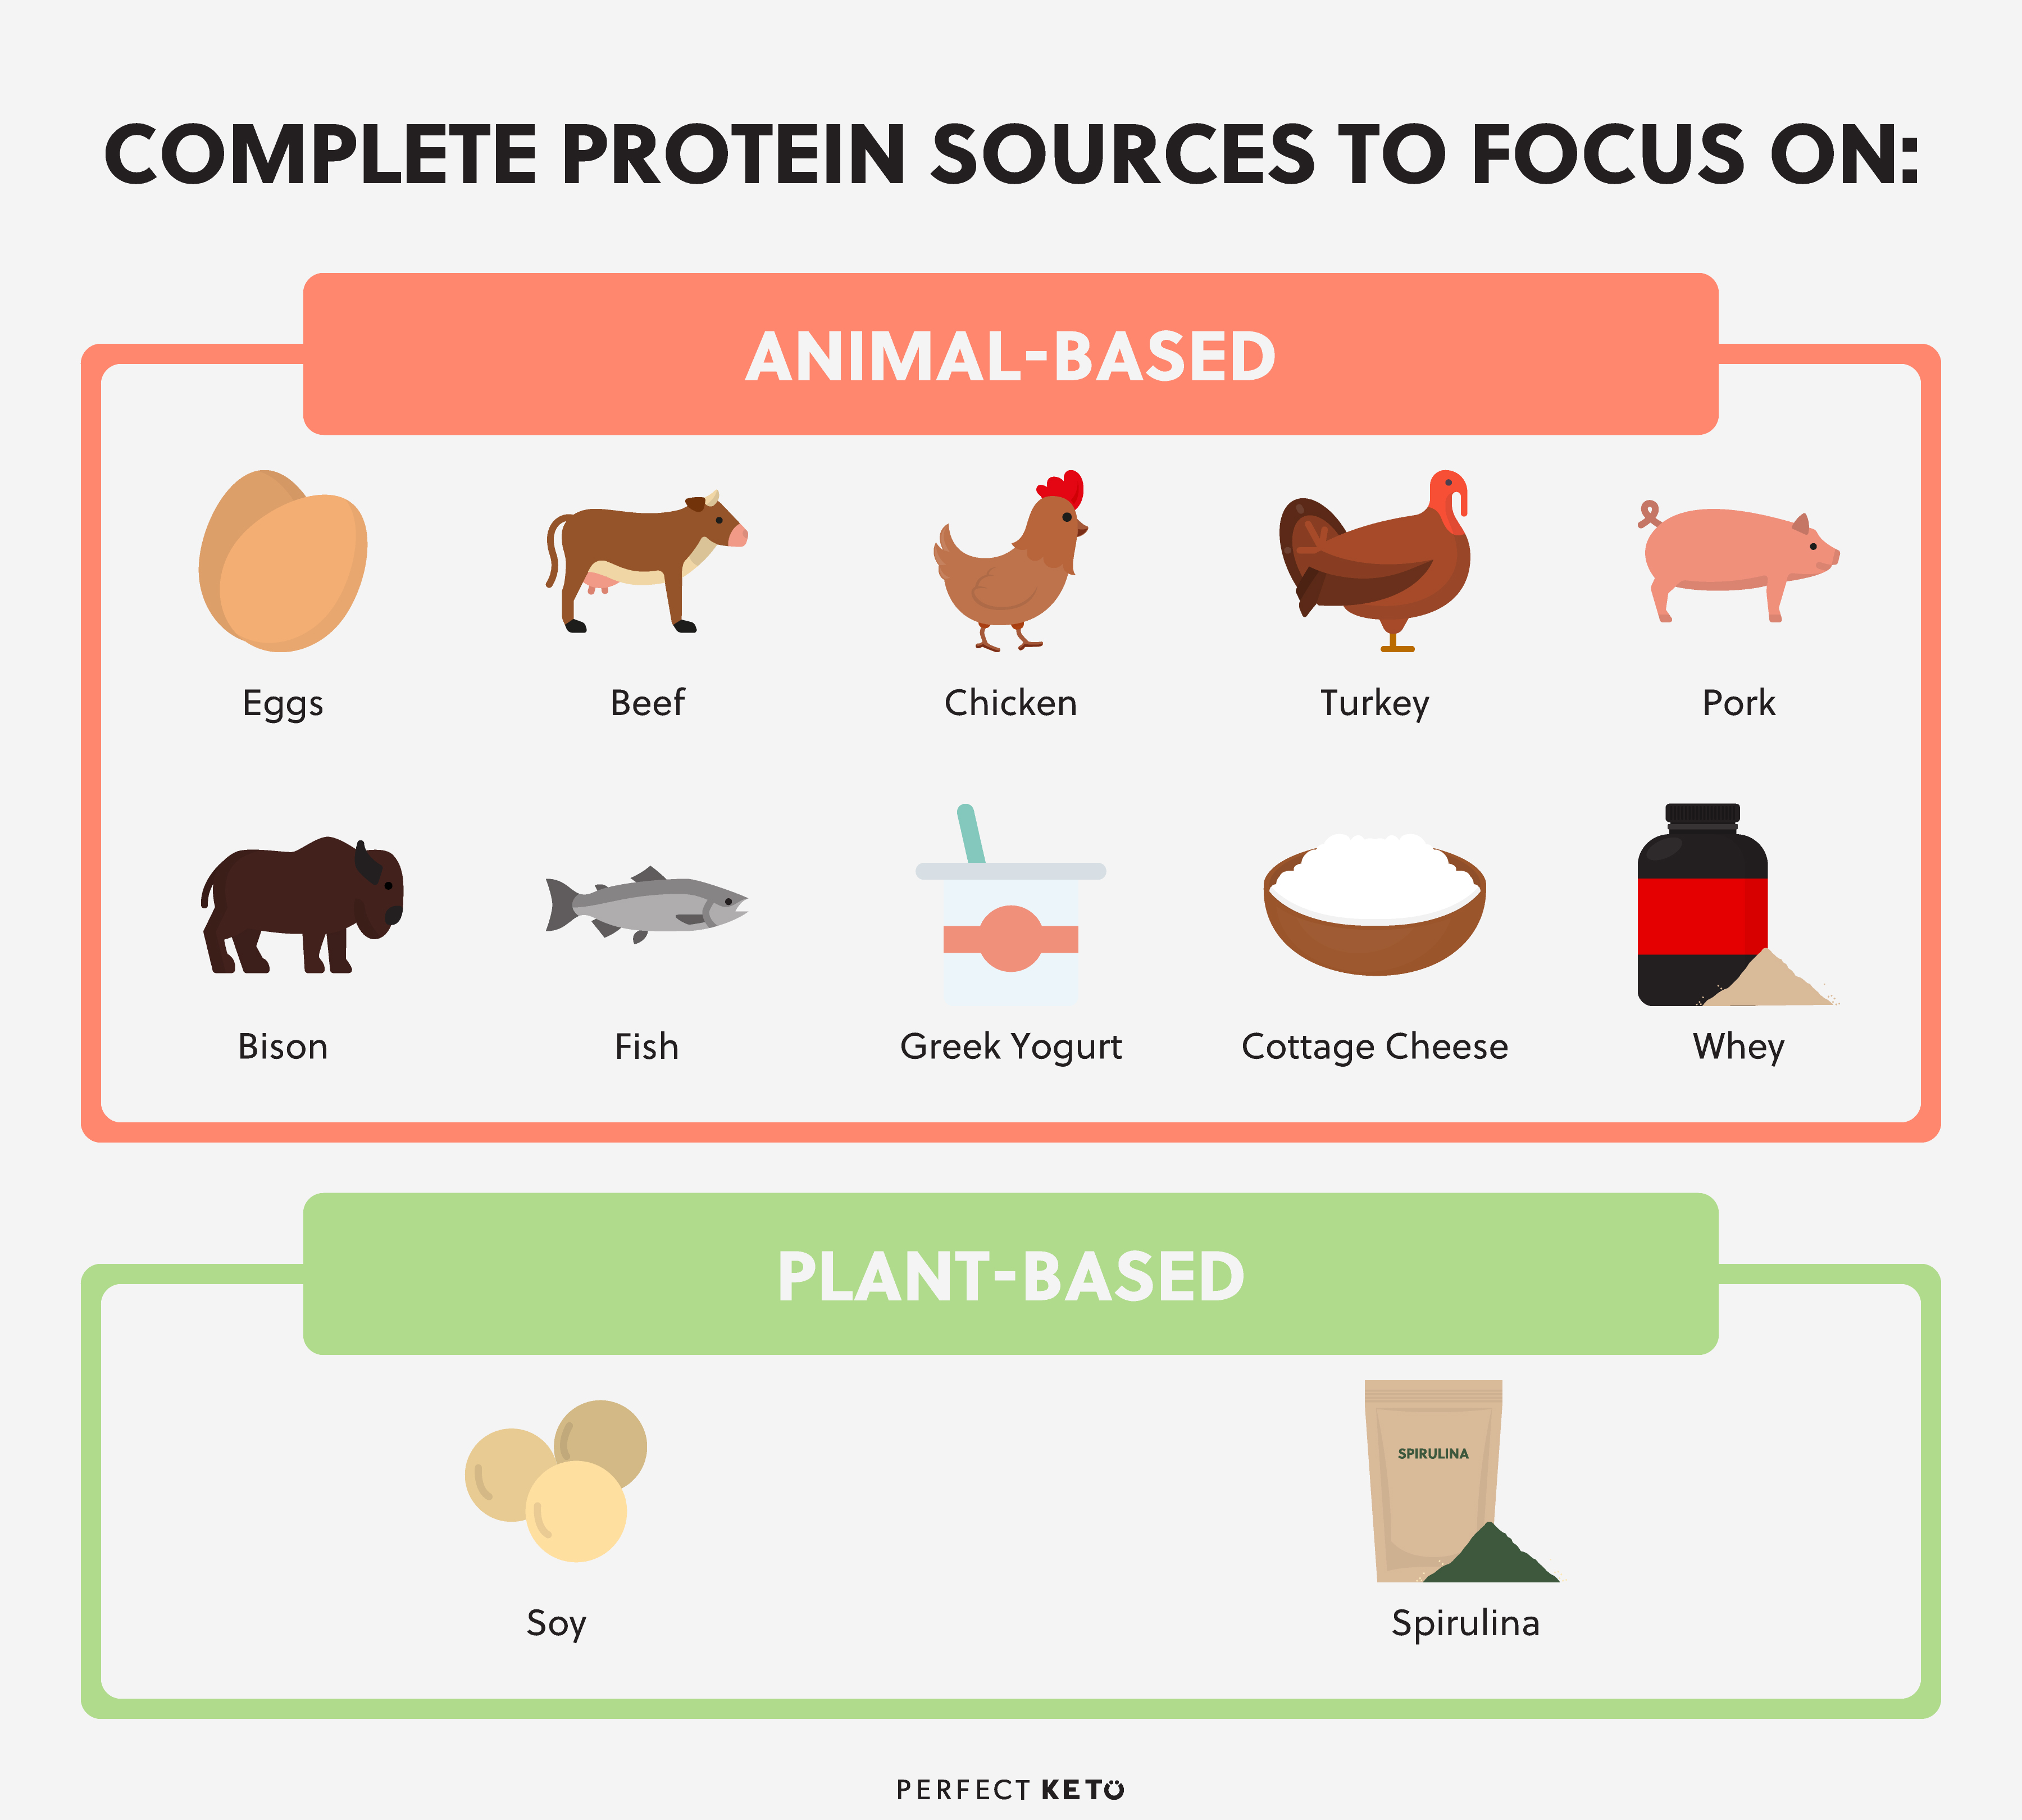 complete-protein-sources-to-focus-on.jpg